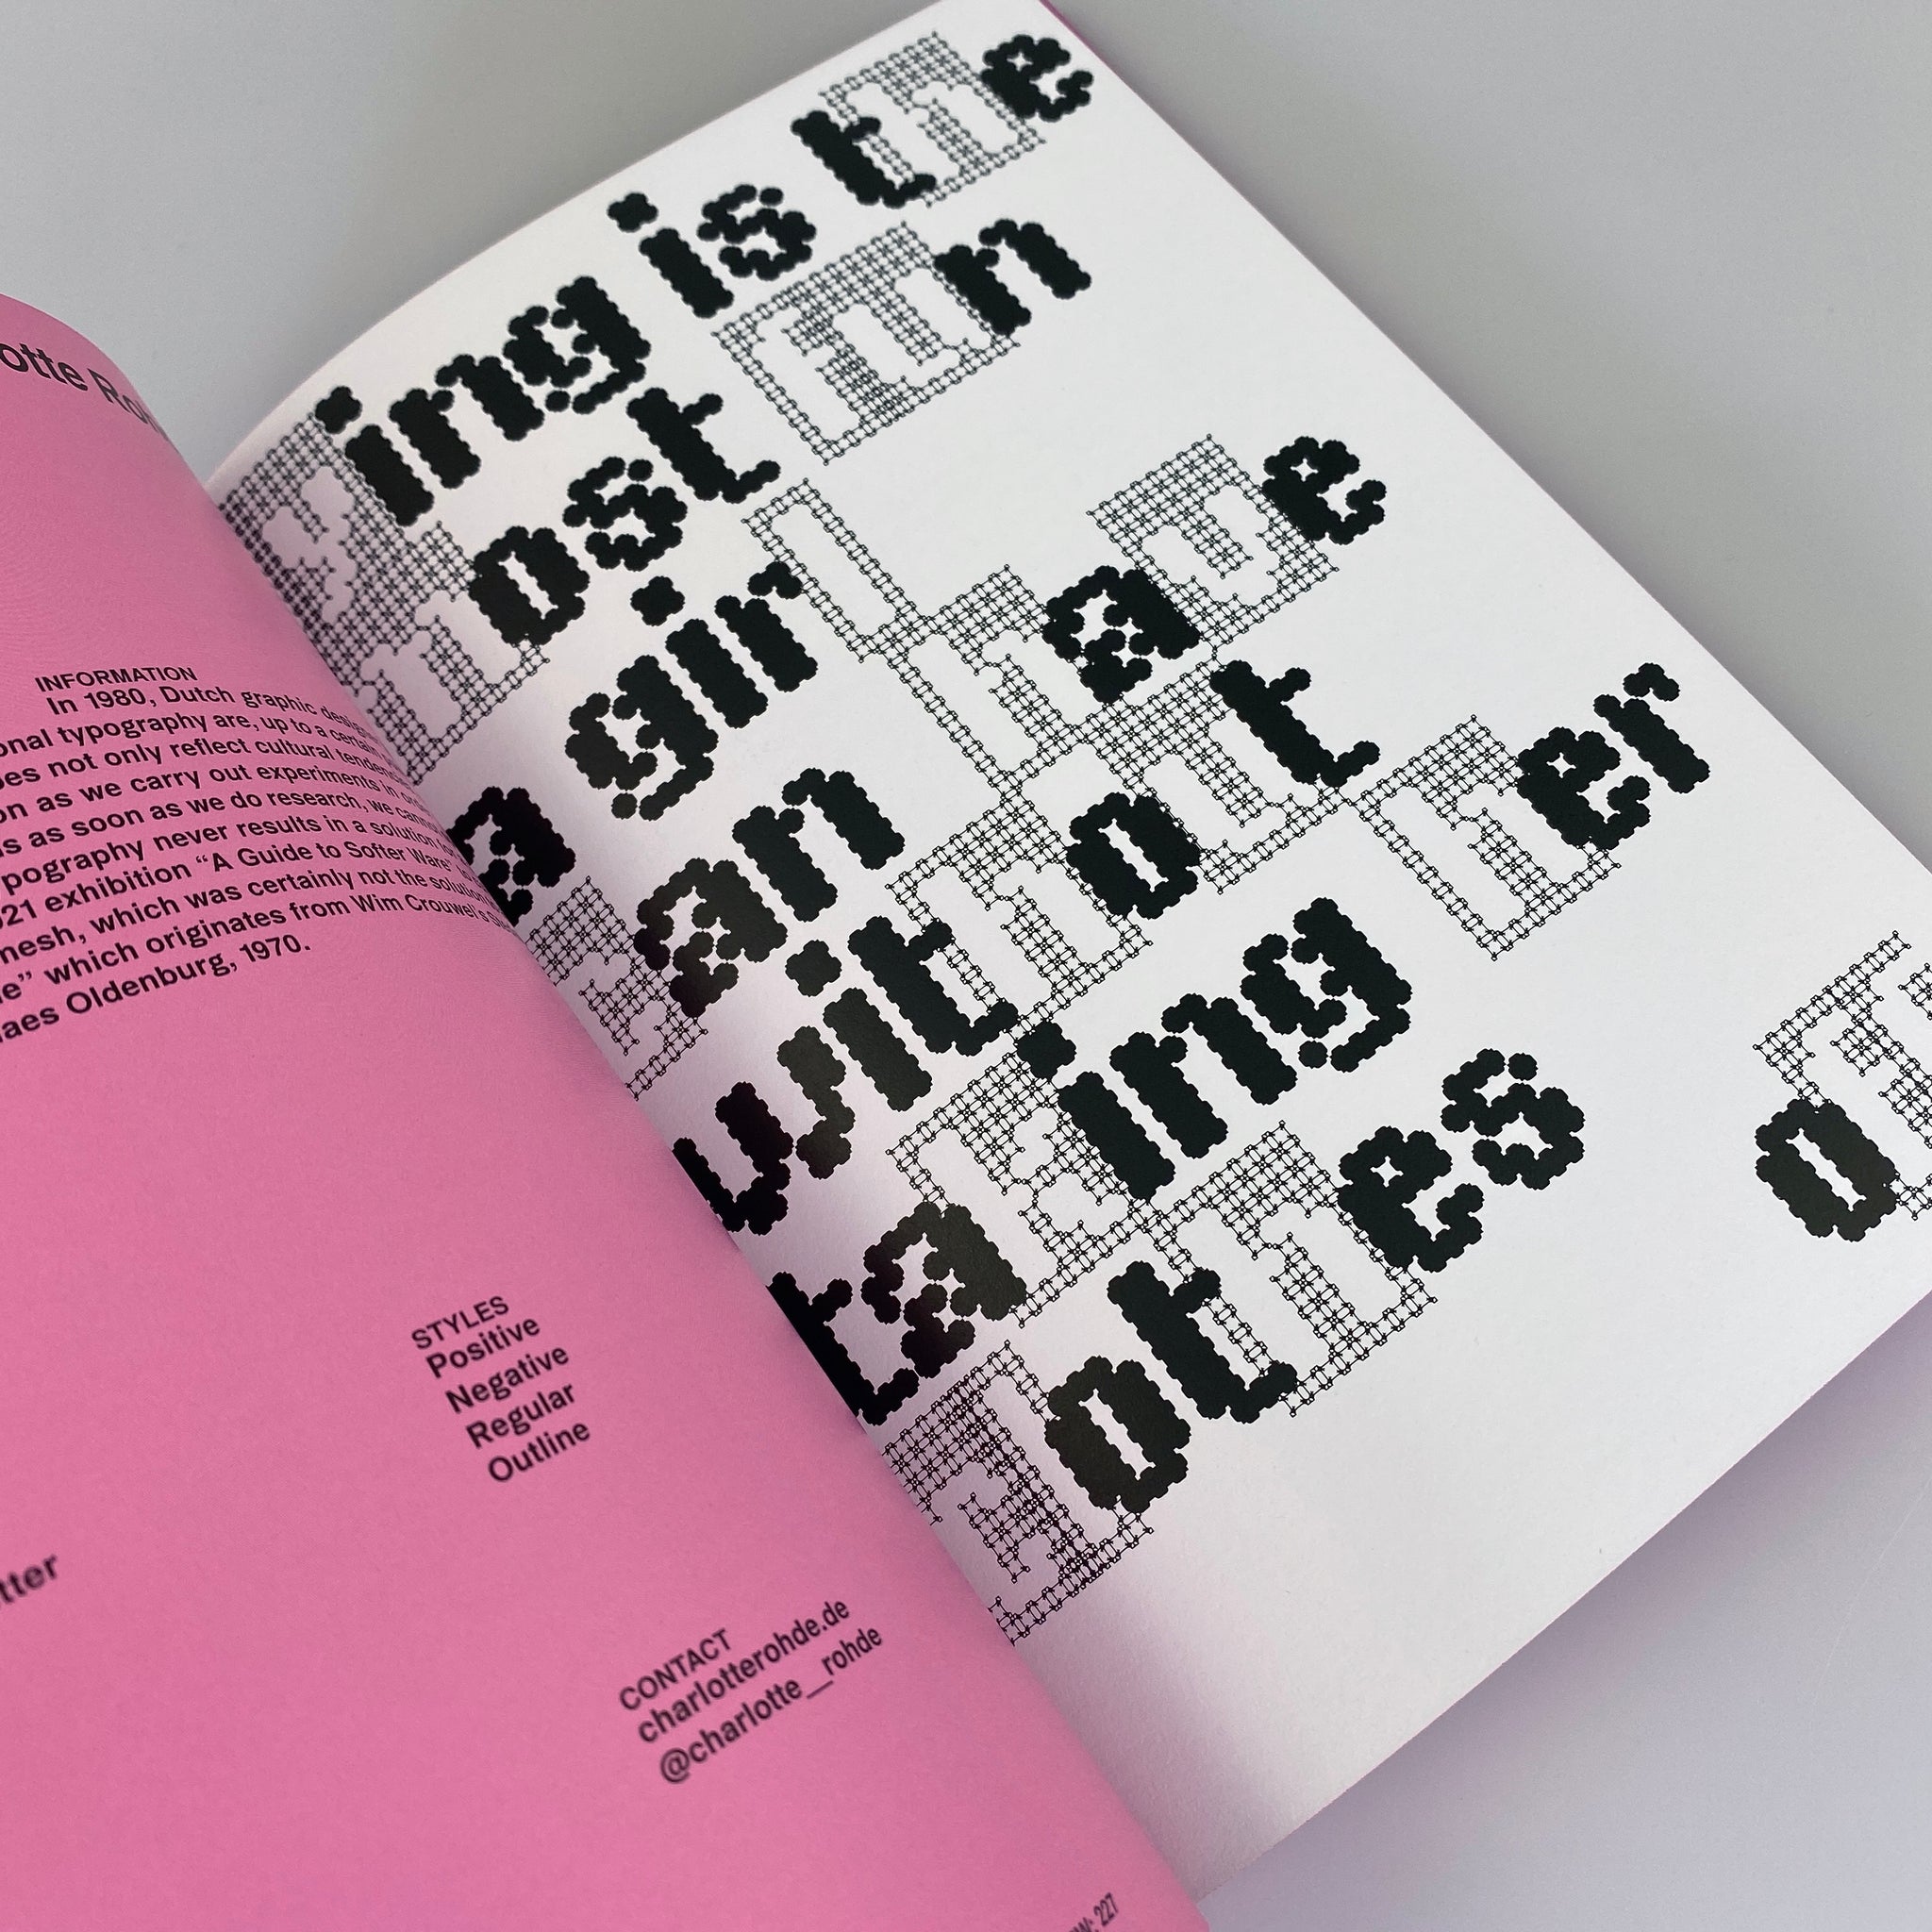 New Aesthetic 3: A Collection of Experimental and Independent Type Design